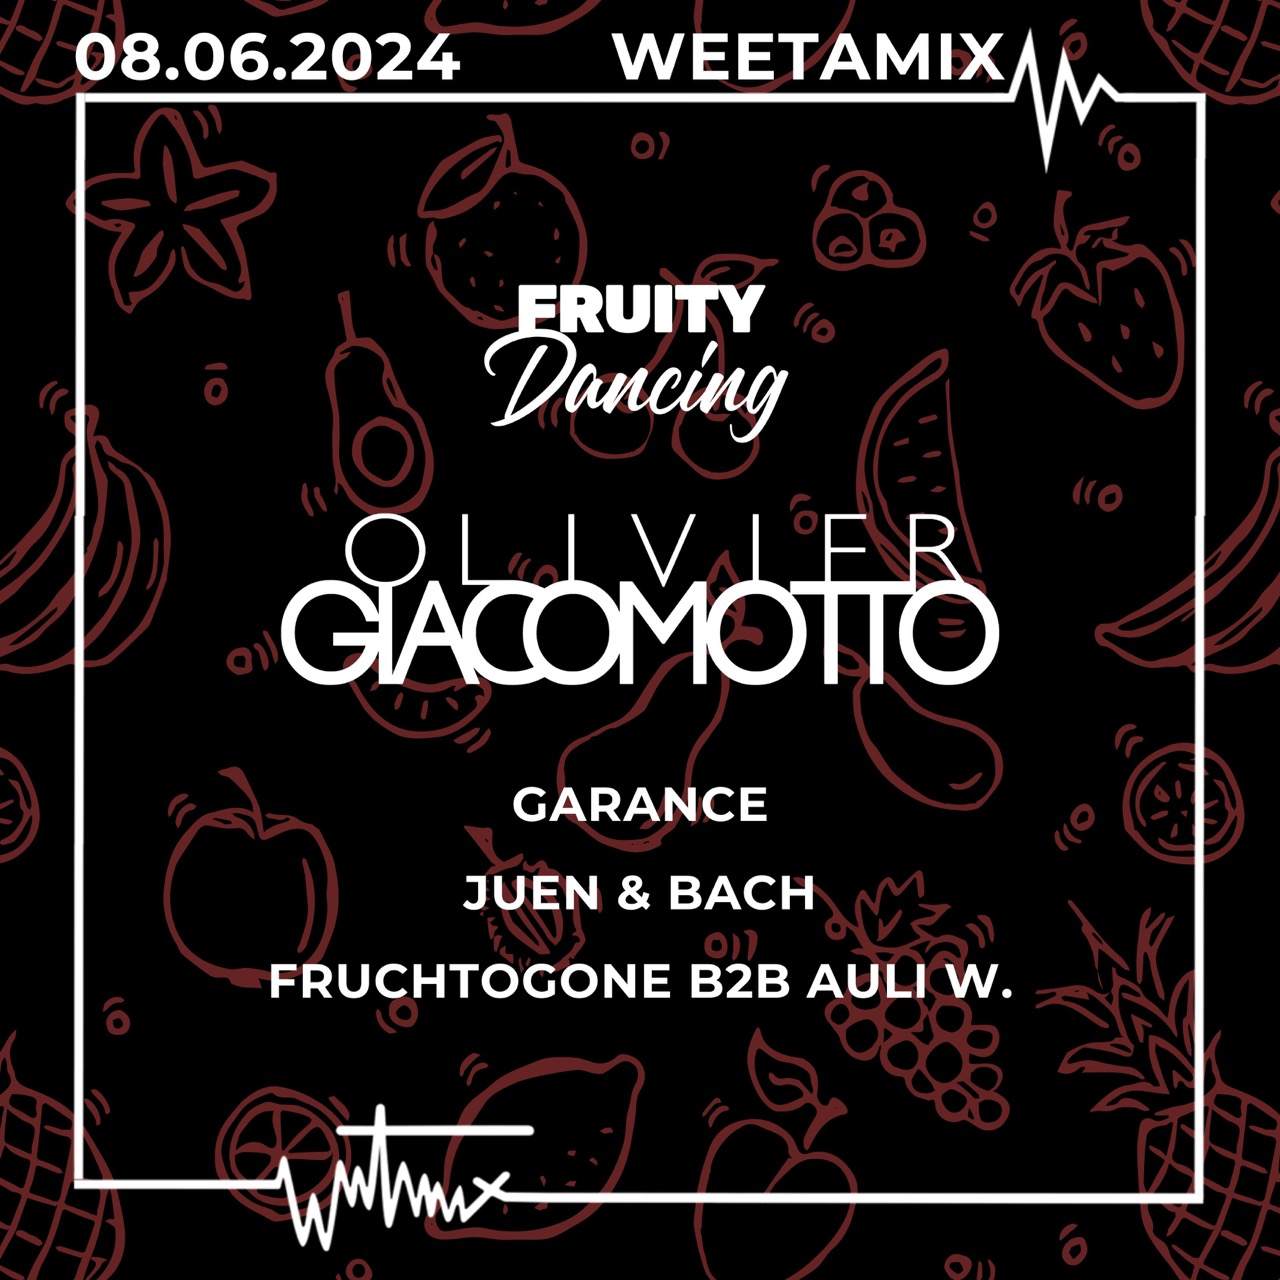 Fruity Dancing: Olivier Giacomotto - フライヤー表